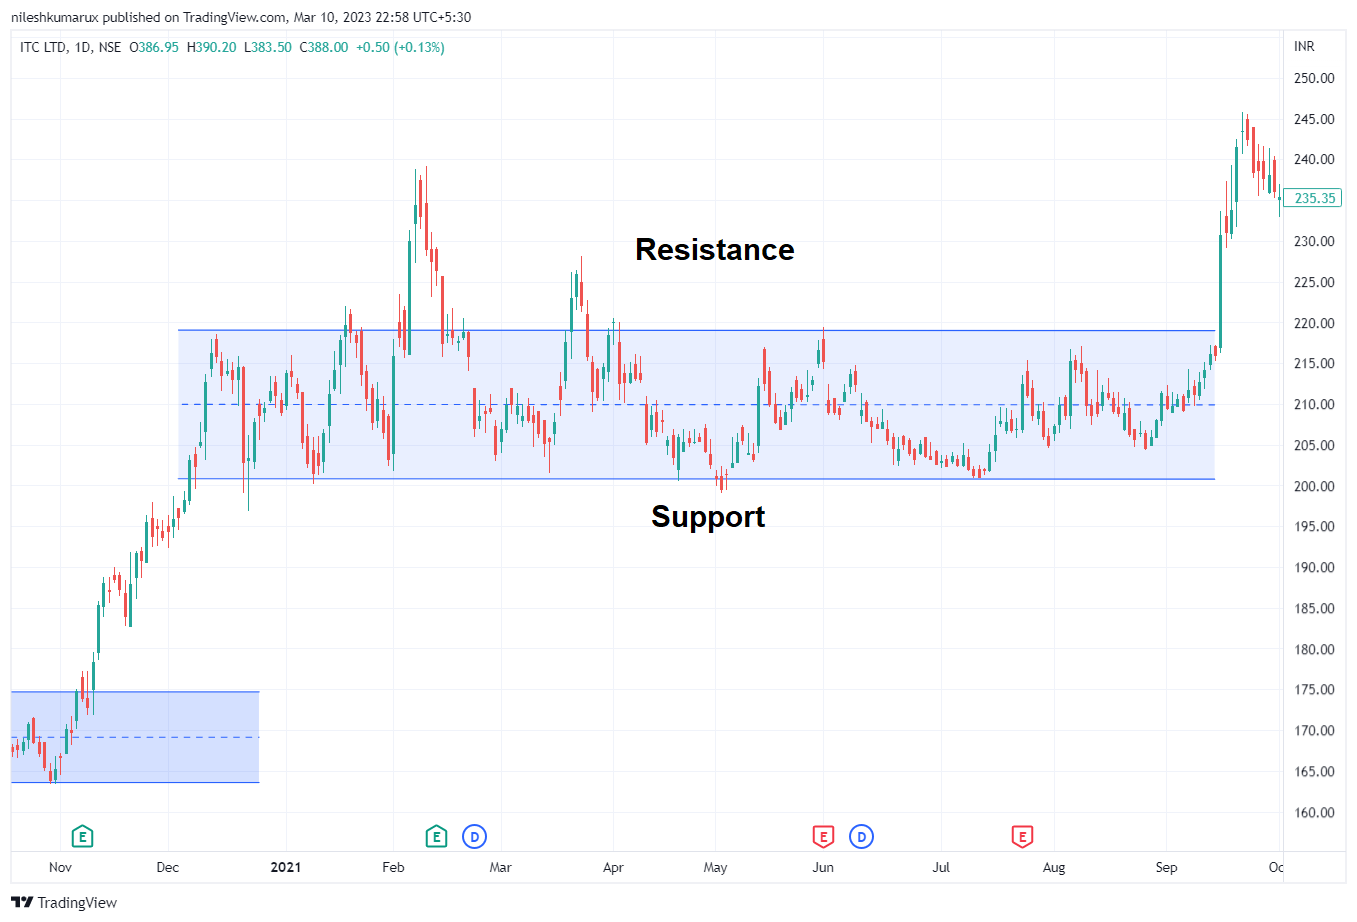 ITC Horizontal support and resistance